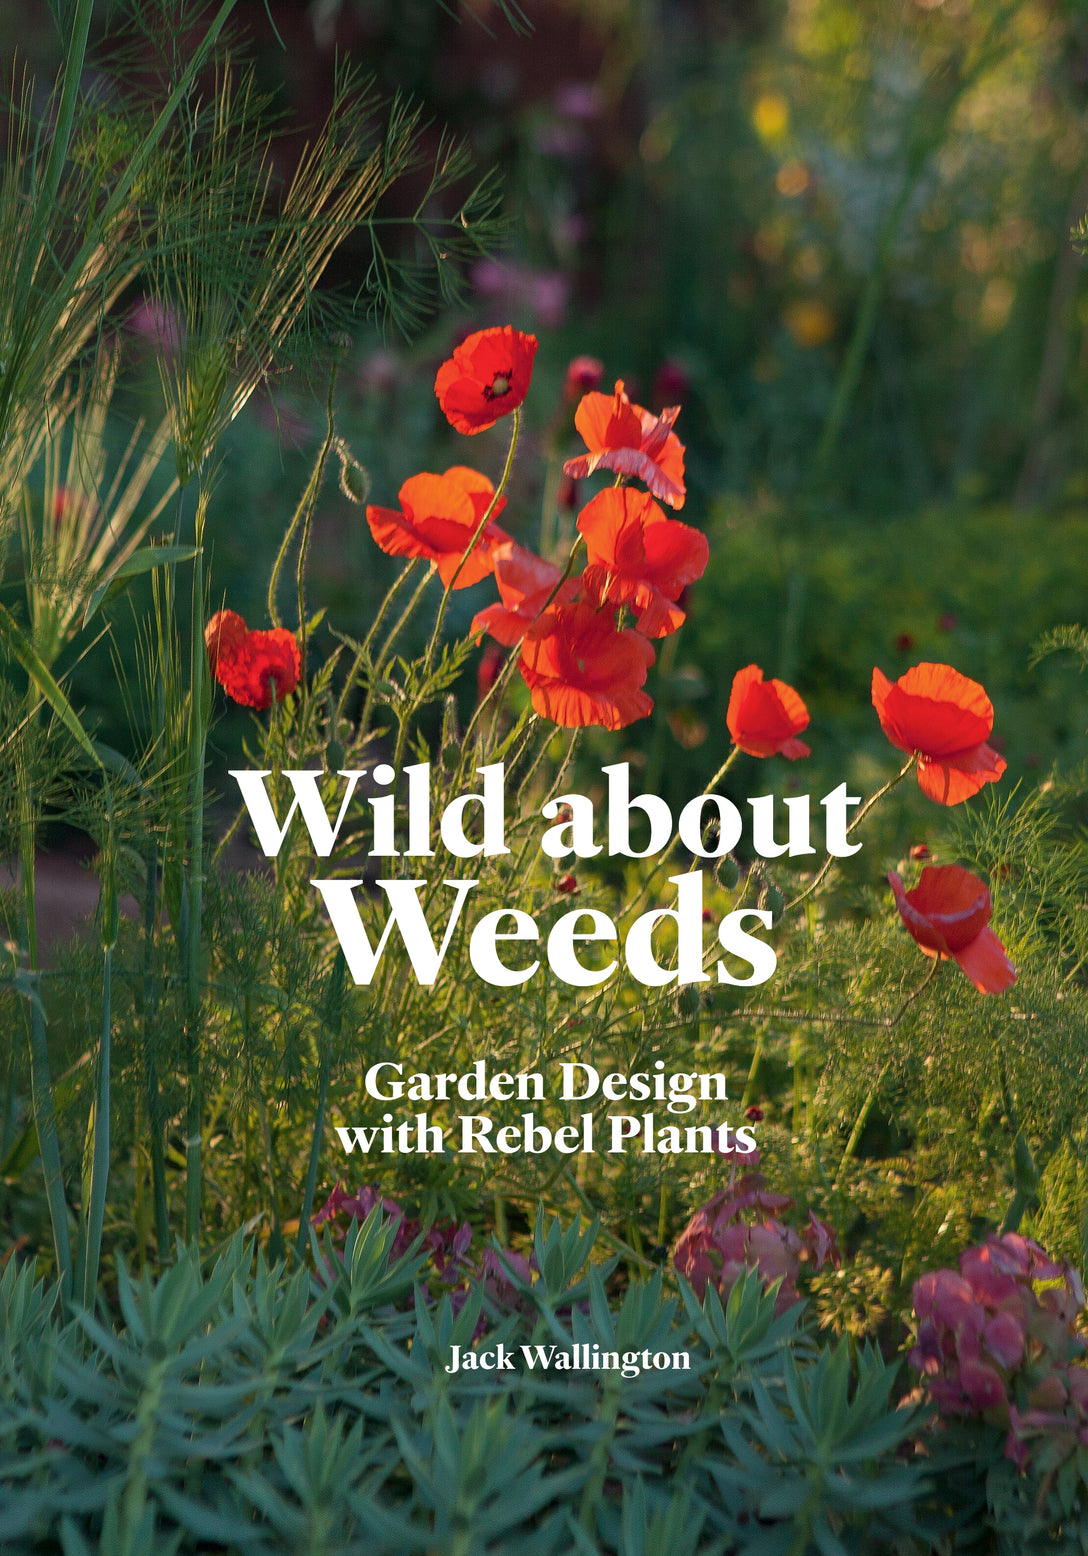 Wild about Weeds by Jack Wallington